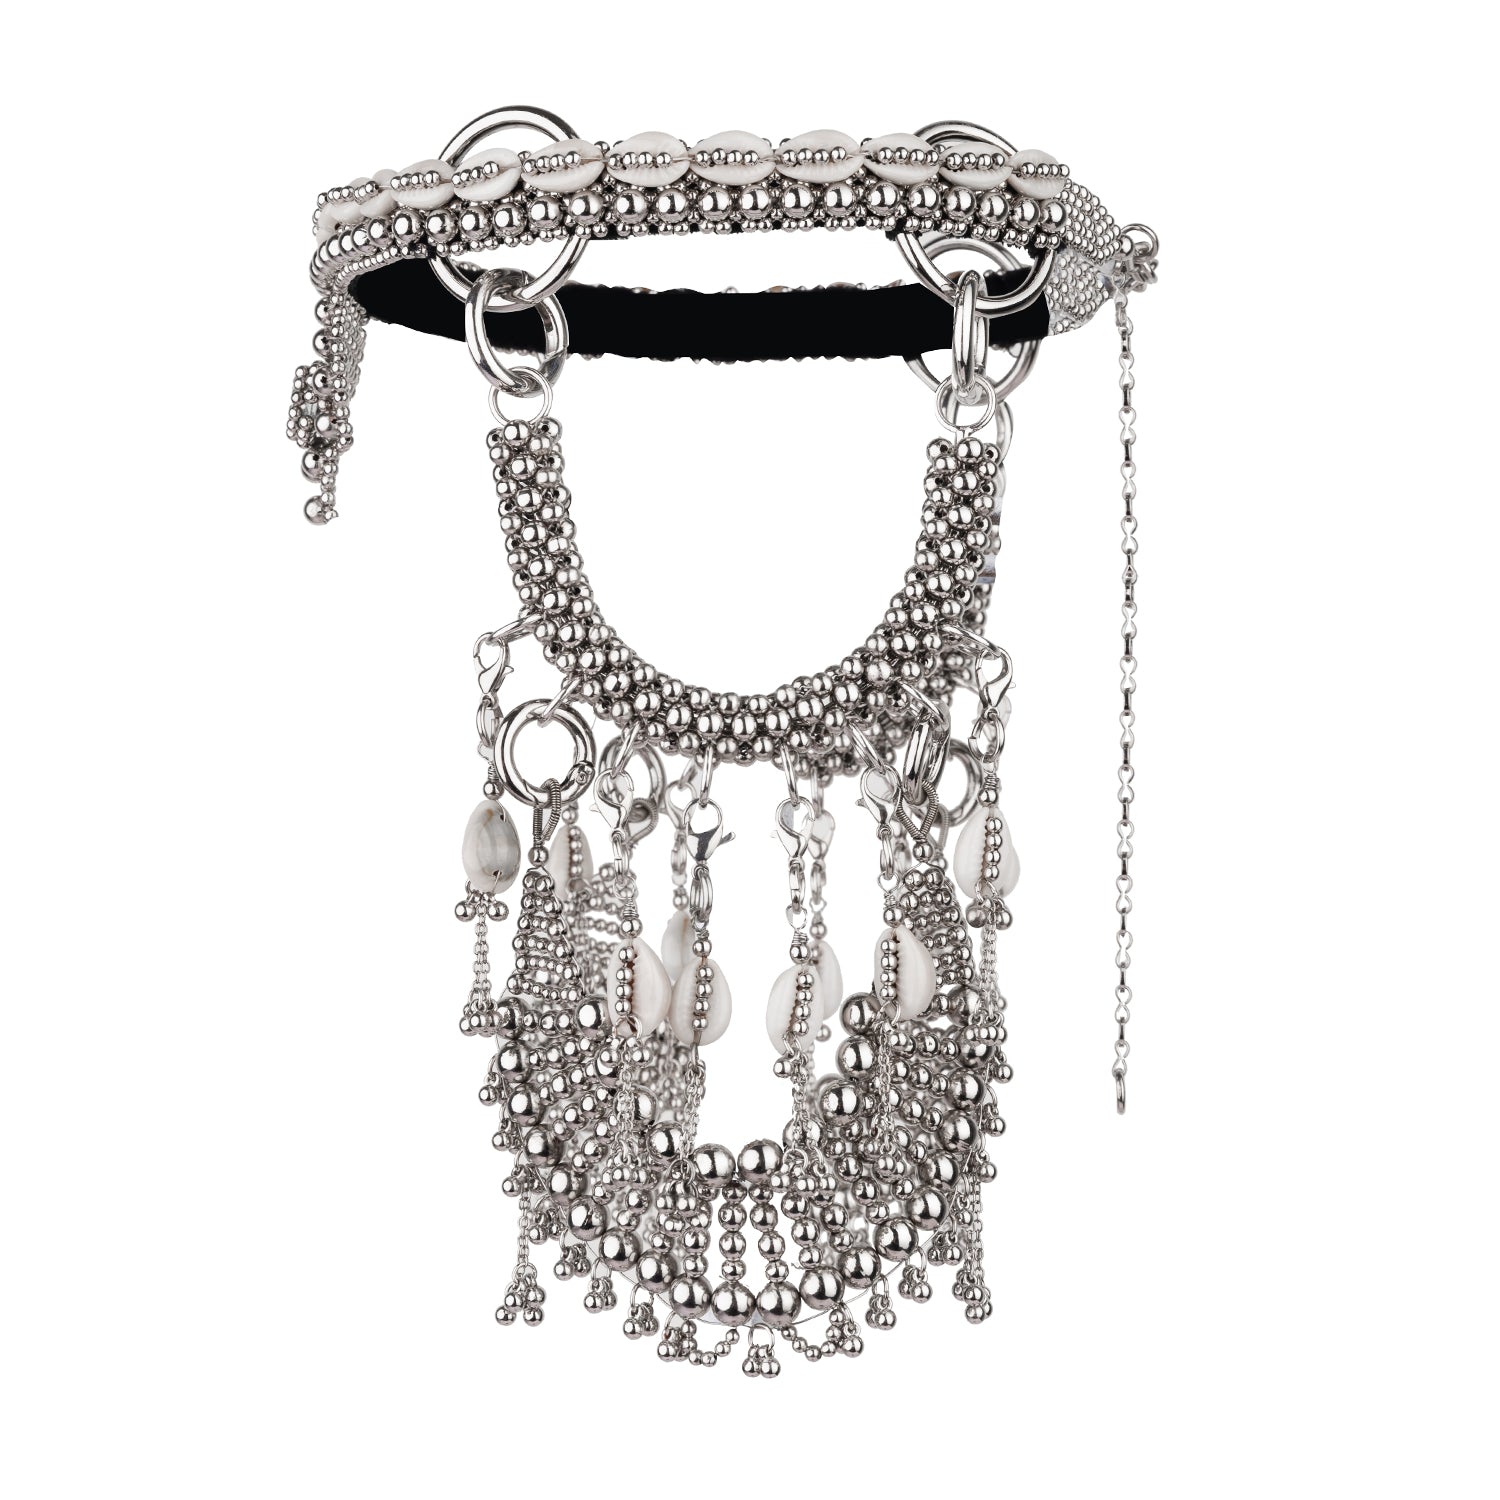 Rushi Headpiece System in Silver